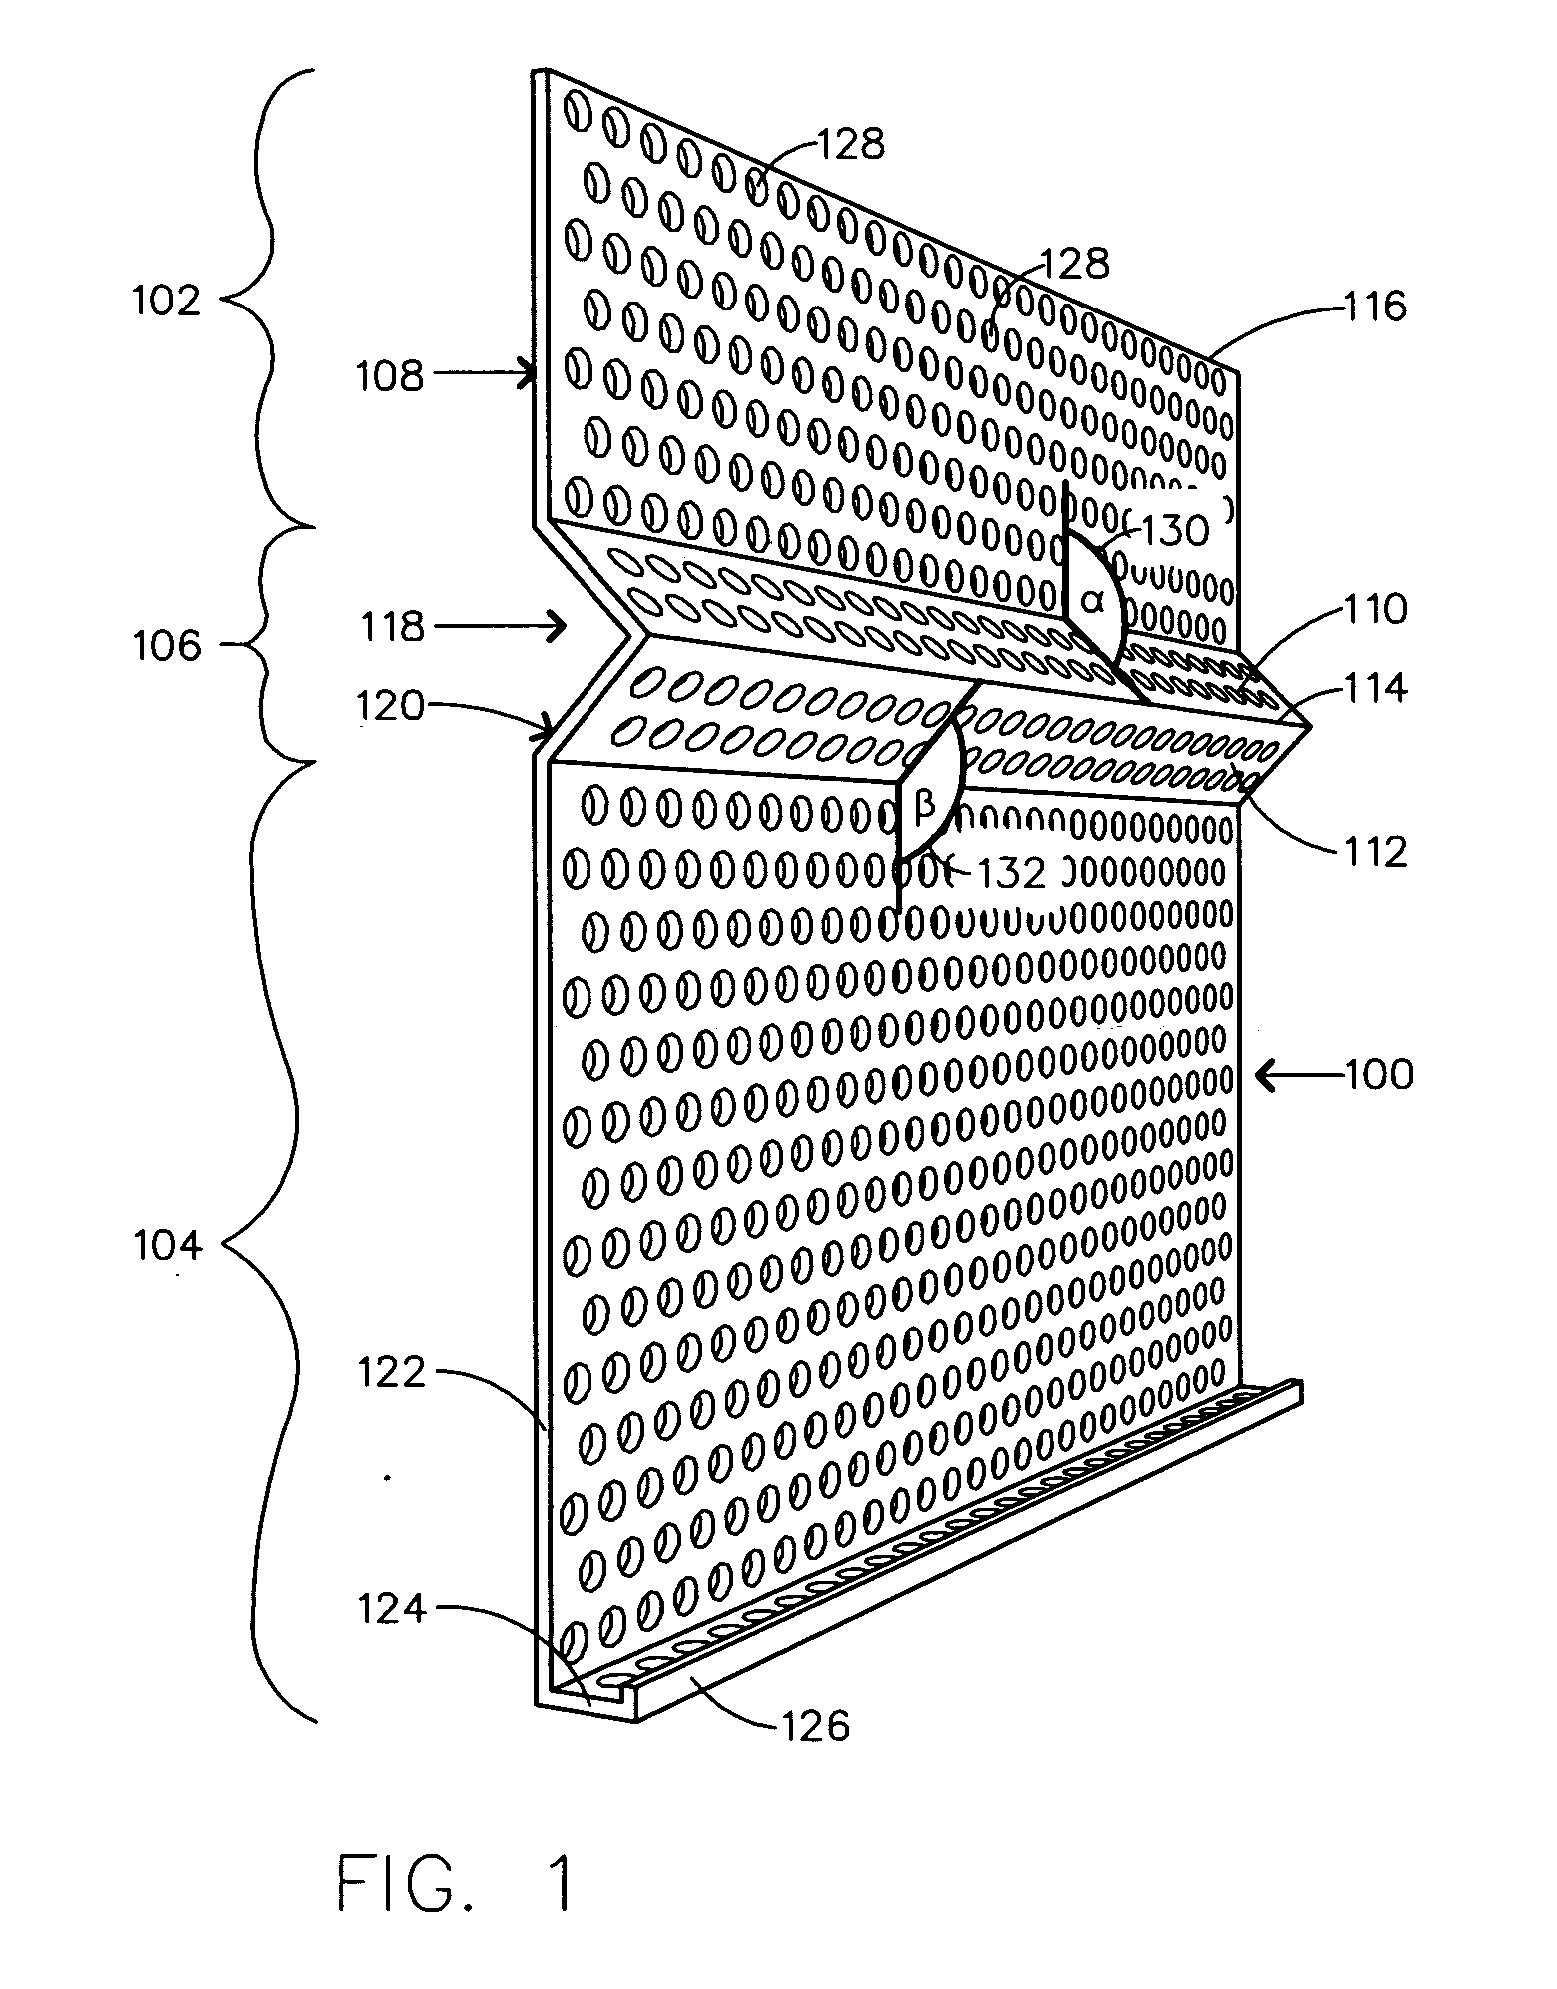 Apparatus, system, and method for extending an exterior wall surface below a debridge of a weep screed